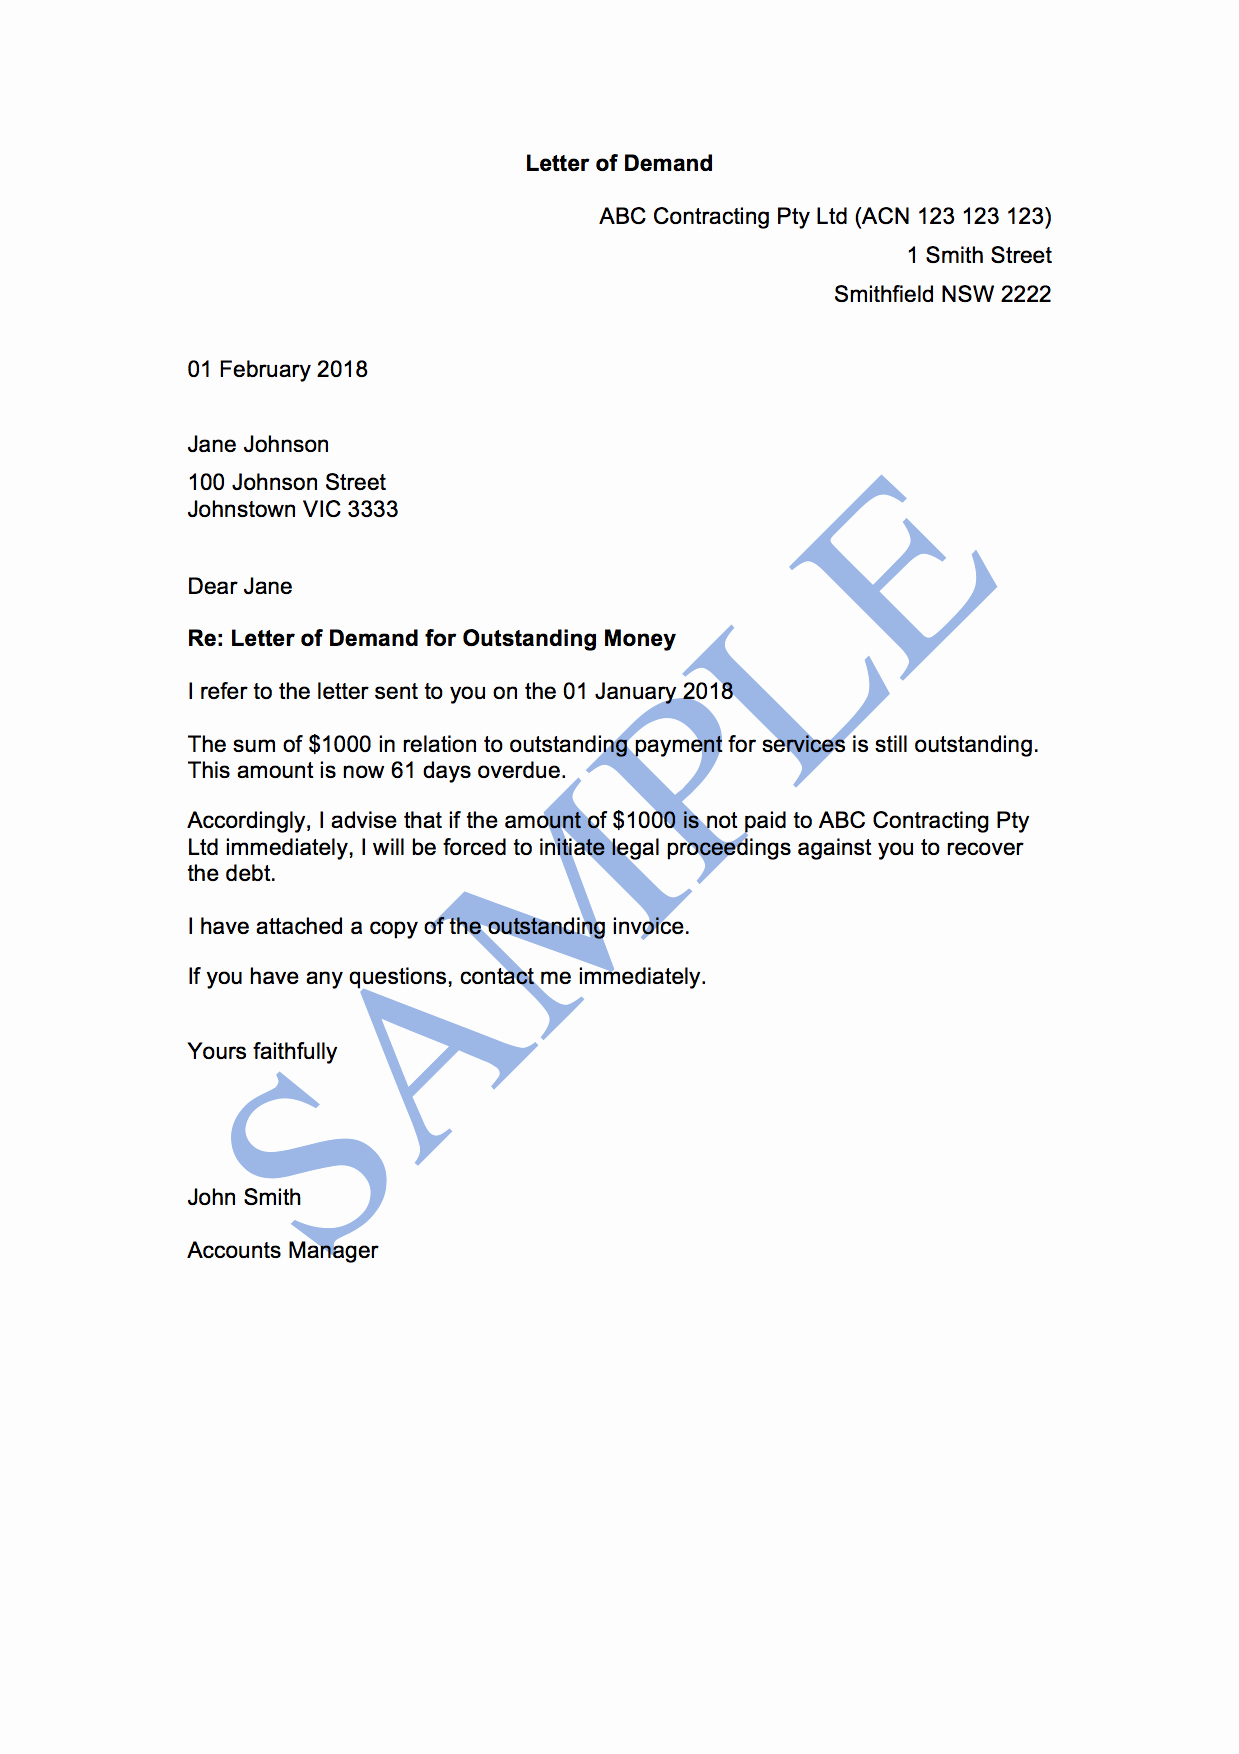 Sample Letter Of Demand Beautiful Letter Of Demand 2nd attempt Free Template